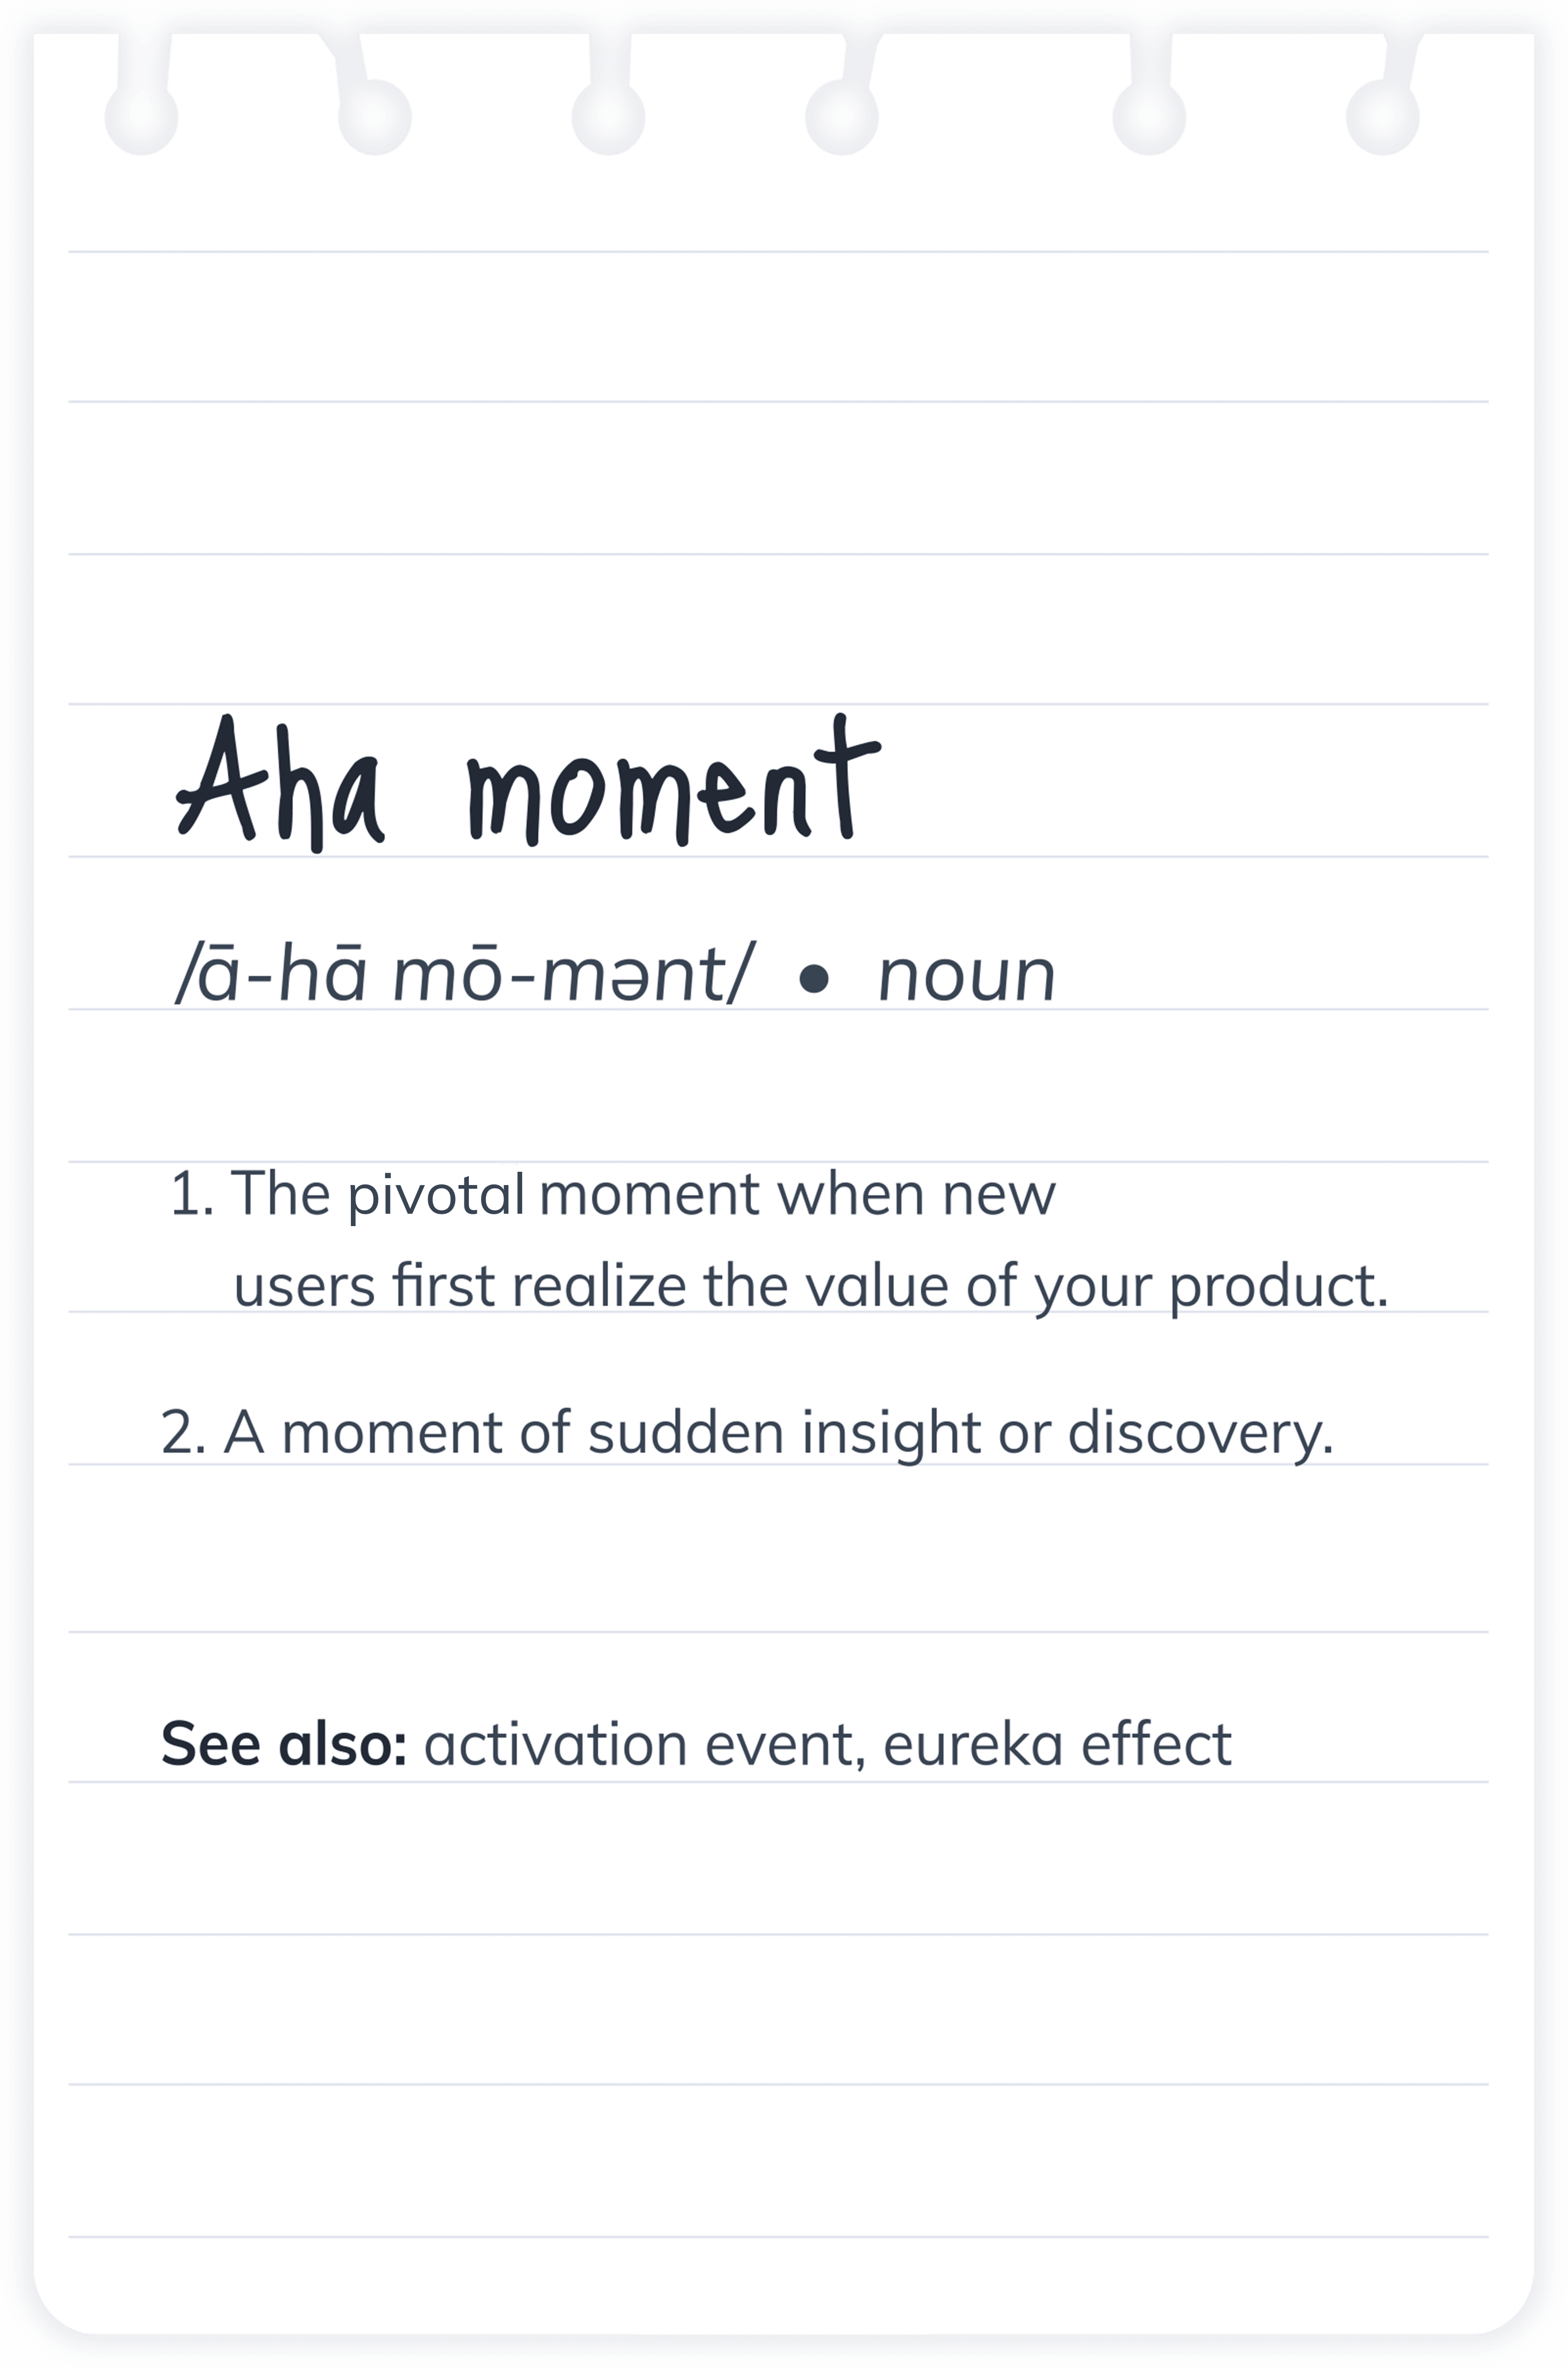 Aha moment definition - the pivotal moment when new users first realize the value of your product